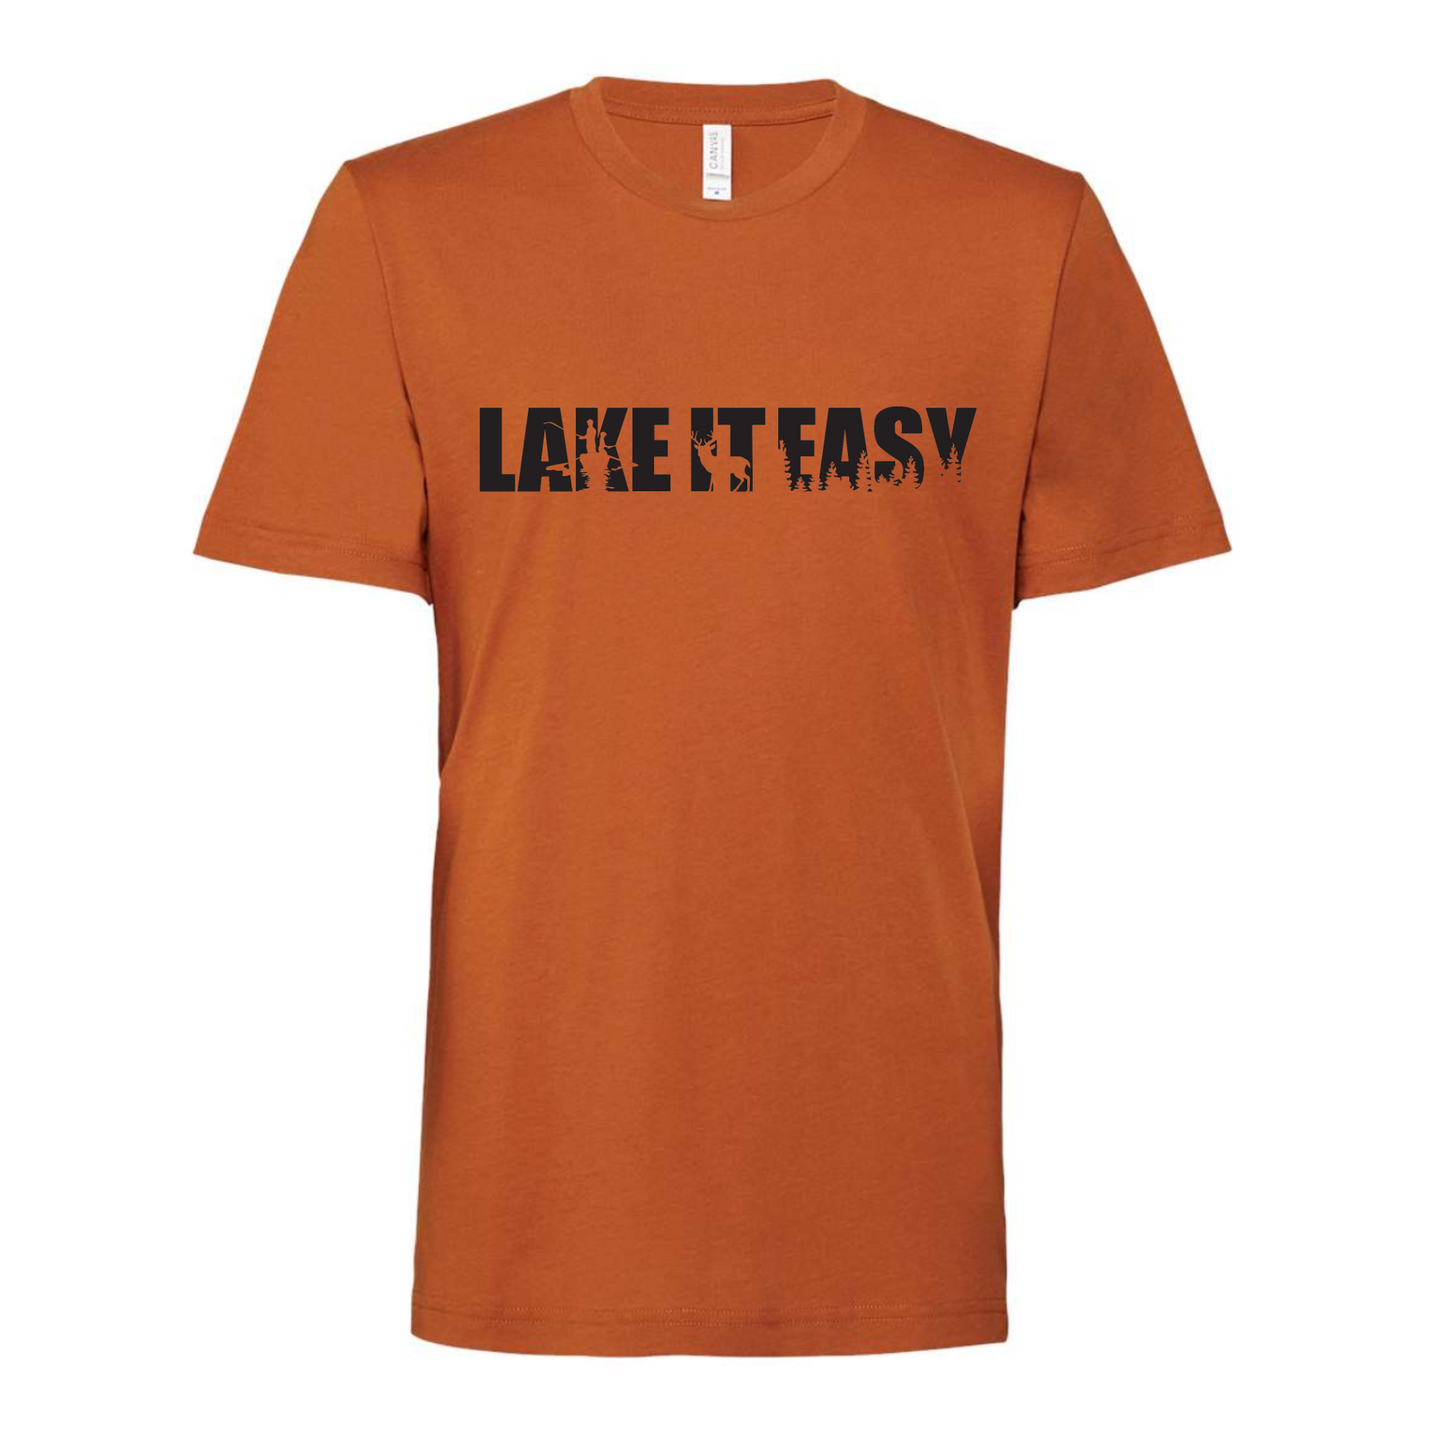 Lake It Easy T-Shirt in orange - front view